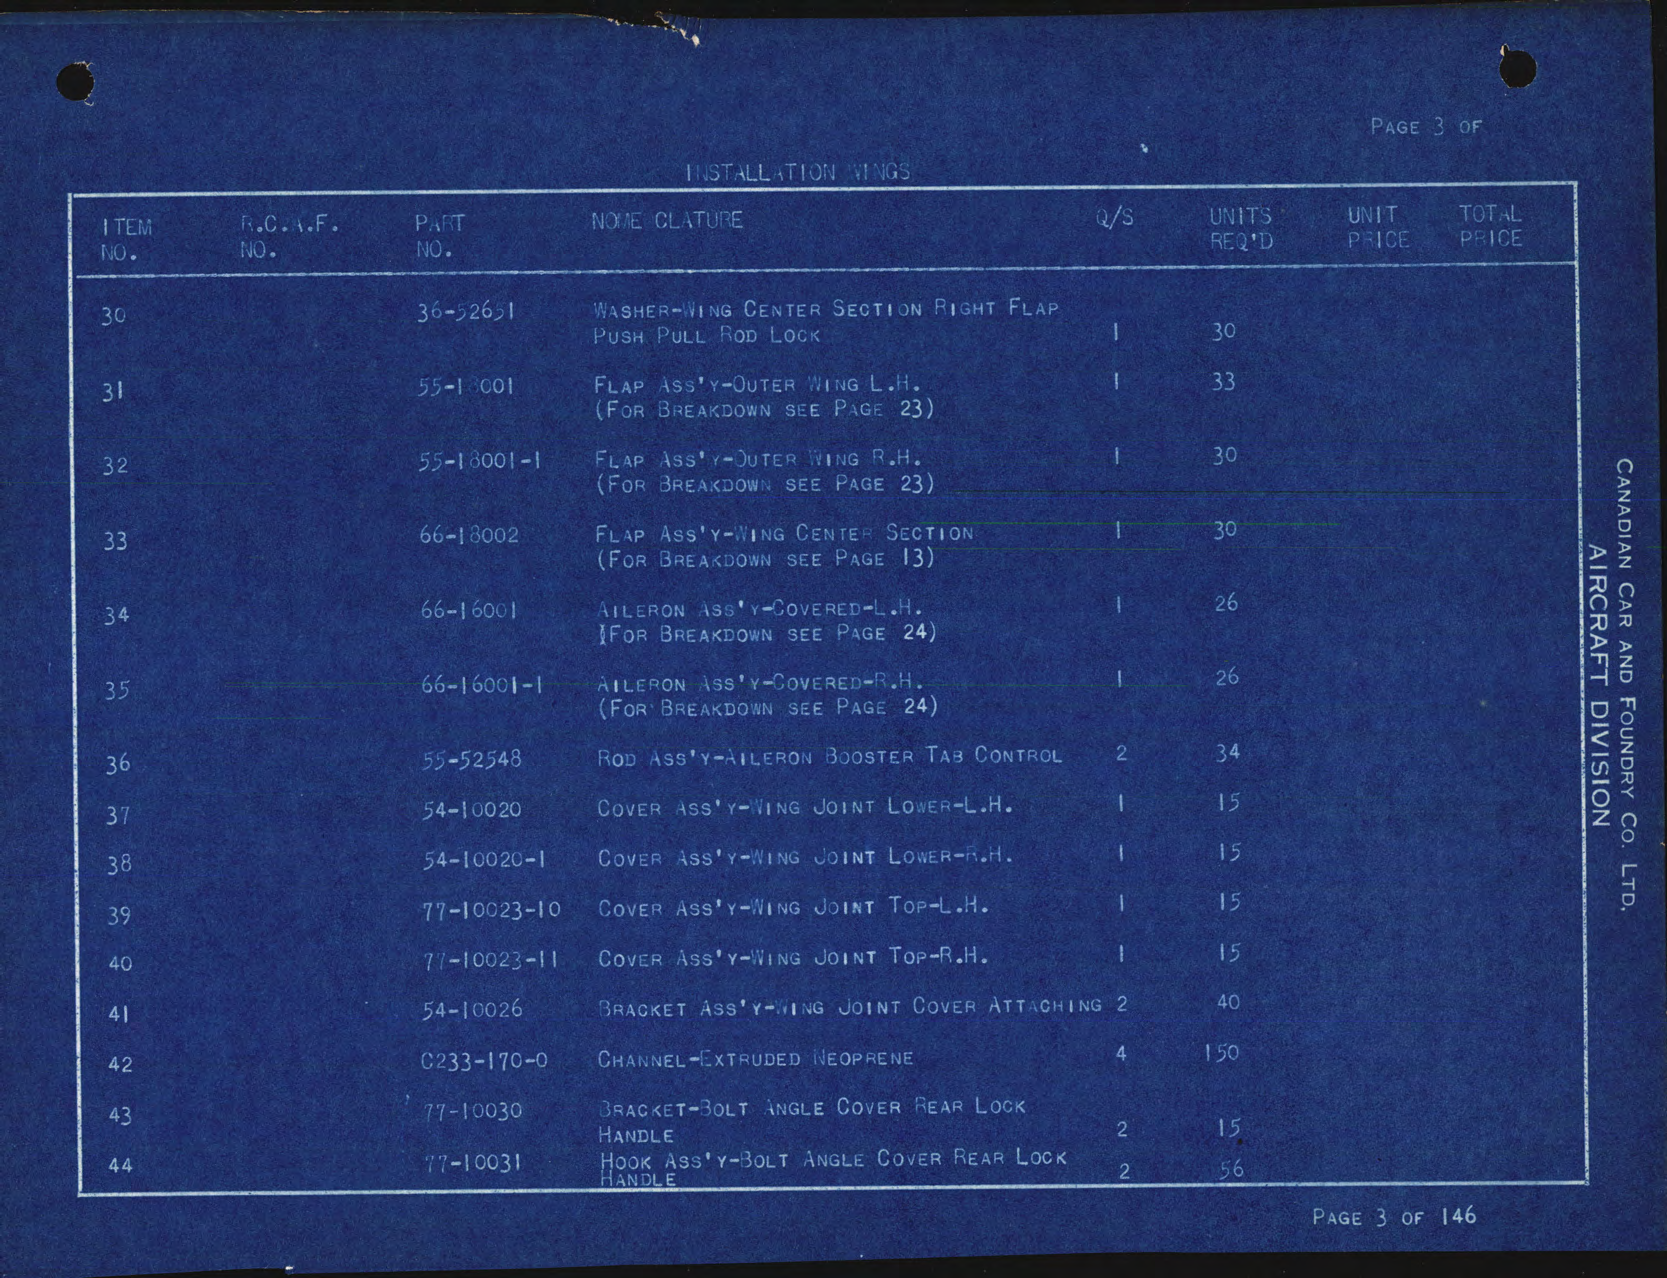 Sample page 7 from AirCorps Library document: Initial Spare Parts Exhibit for 150 Harvard II Aeroplanes